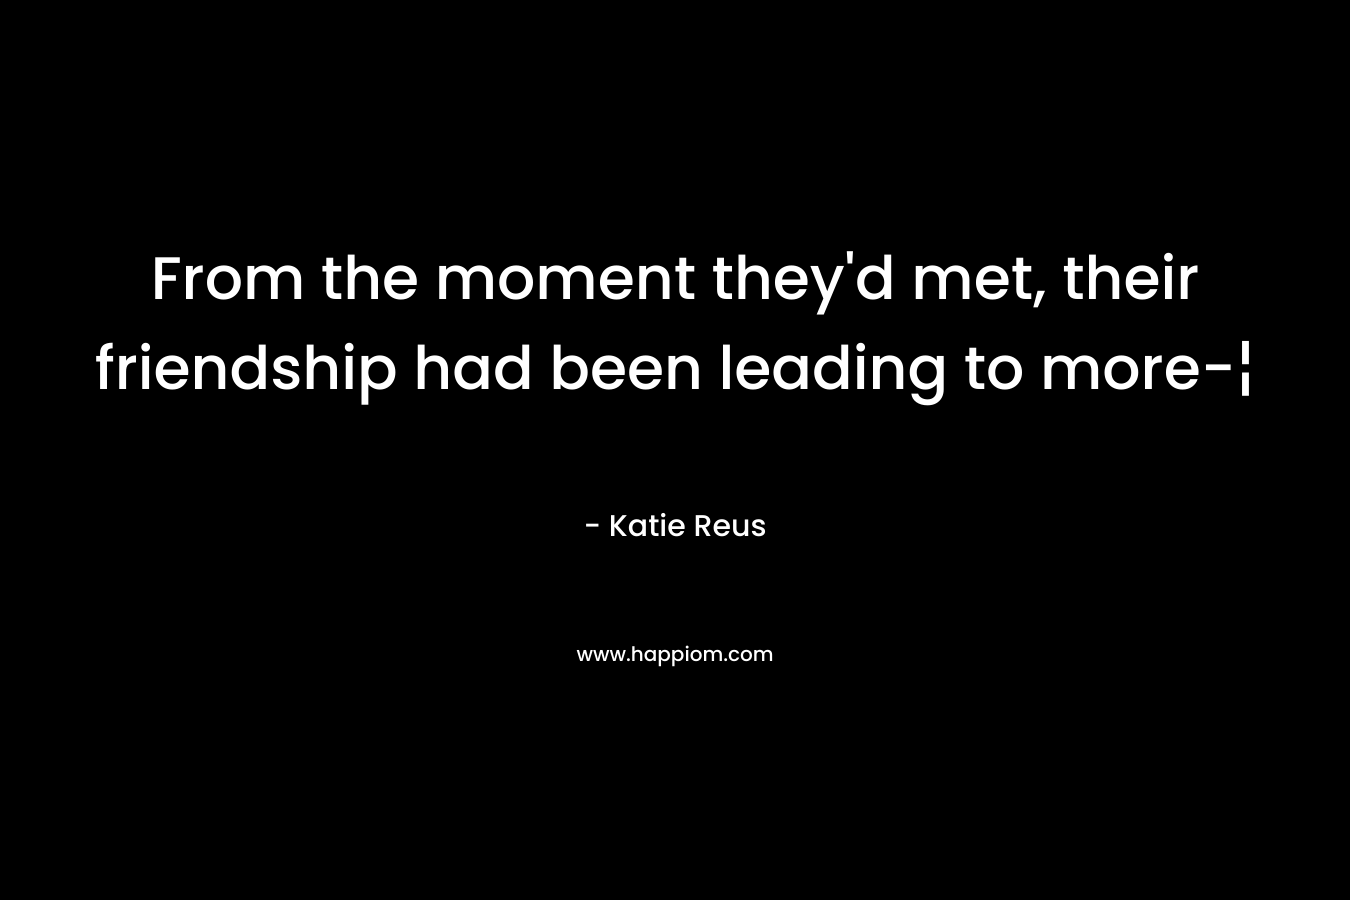 From the moment they’d met, their friendship had been leading to more-¦ – Katie Reus